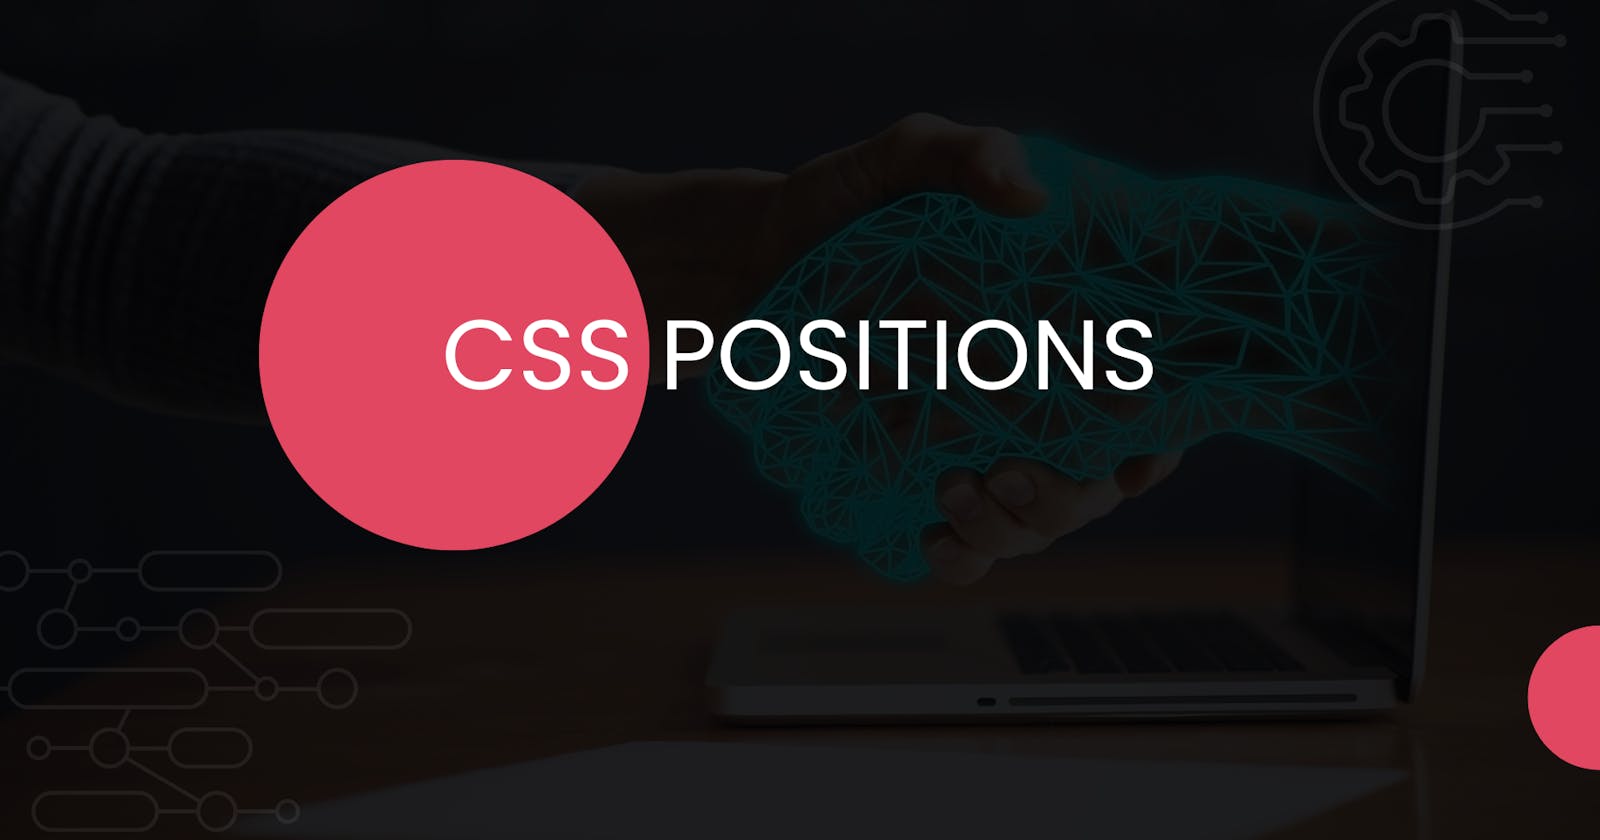 Positions in CSS